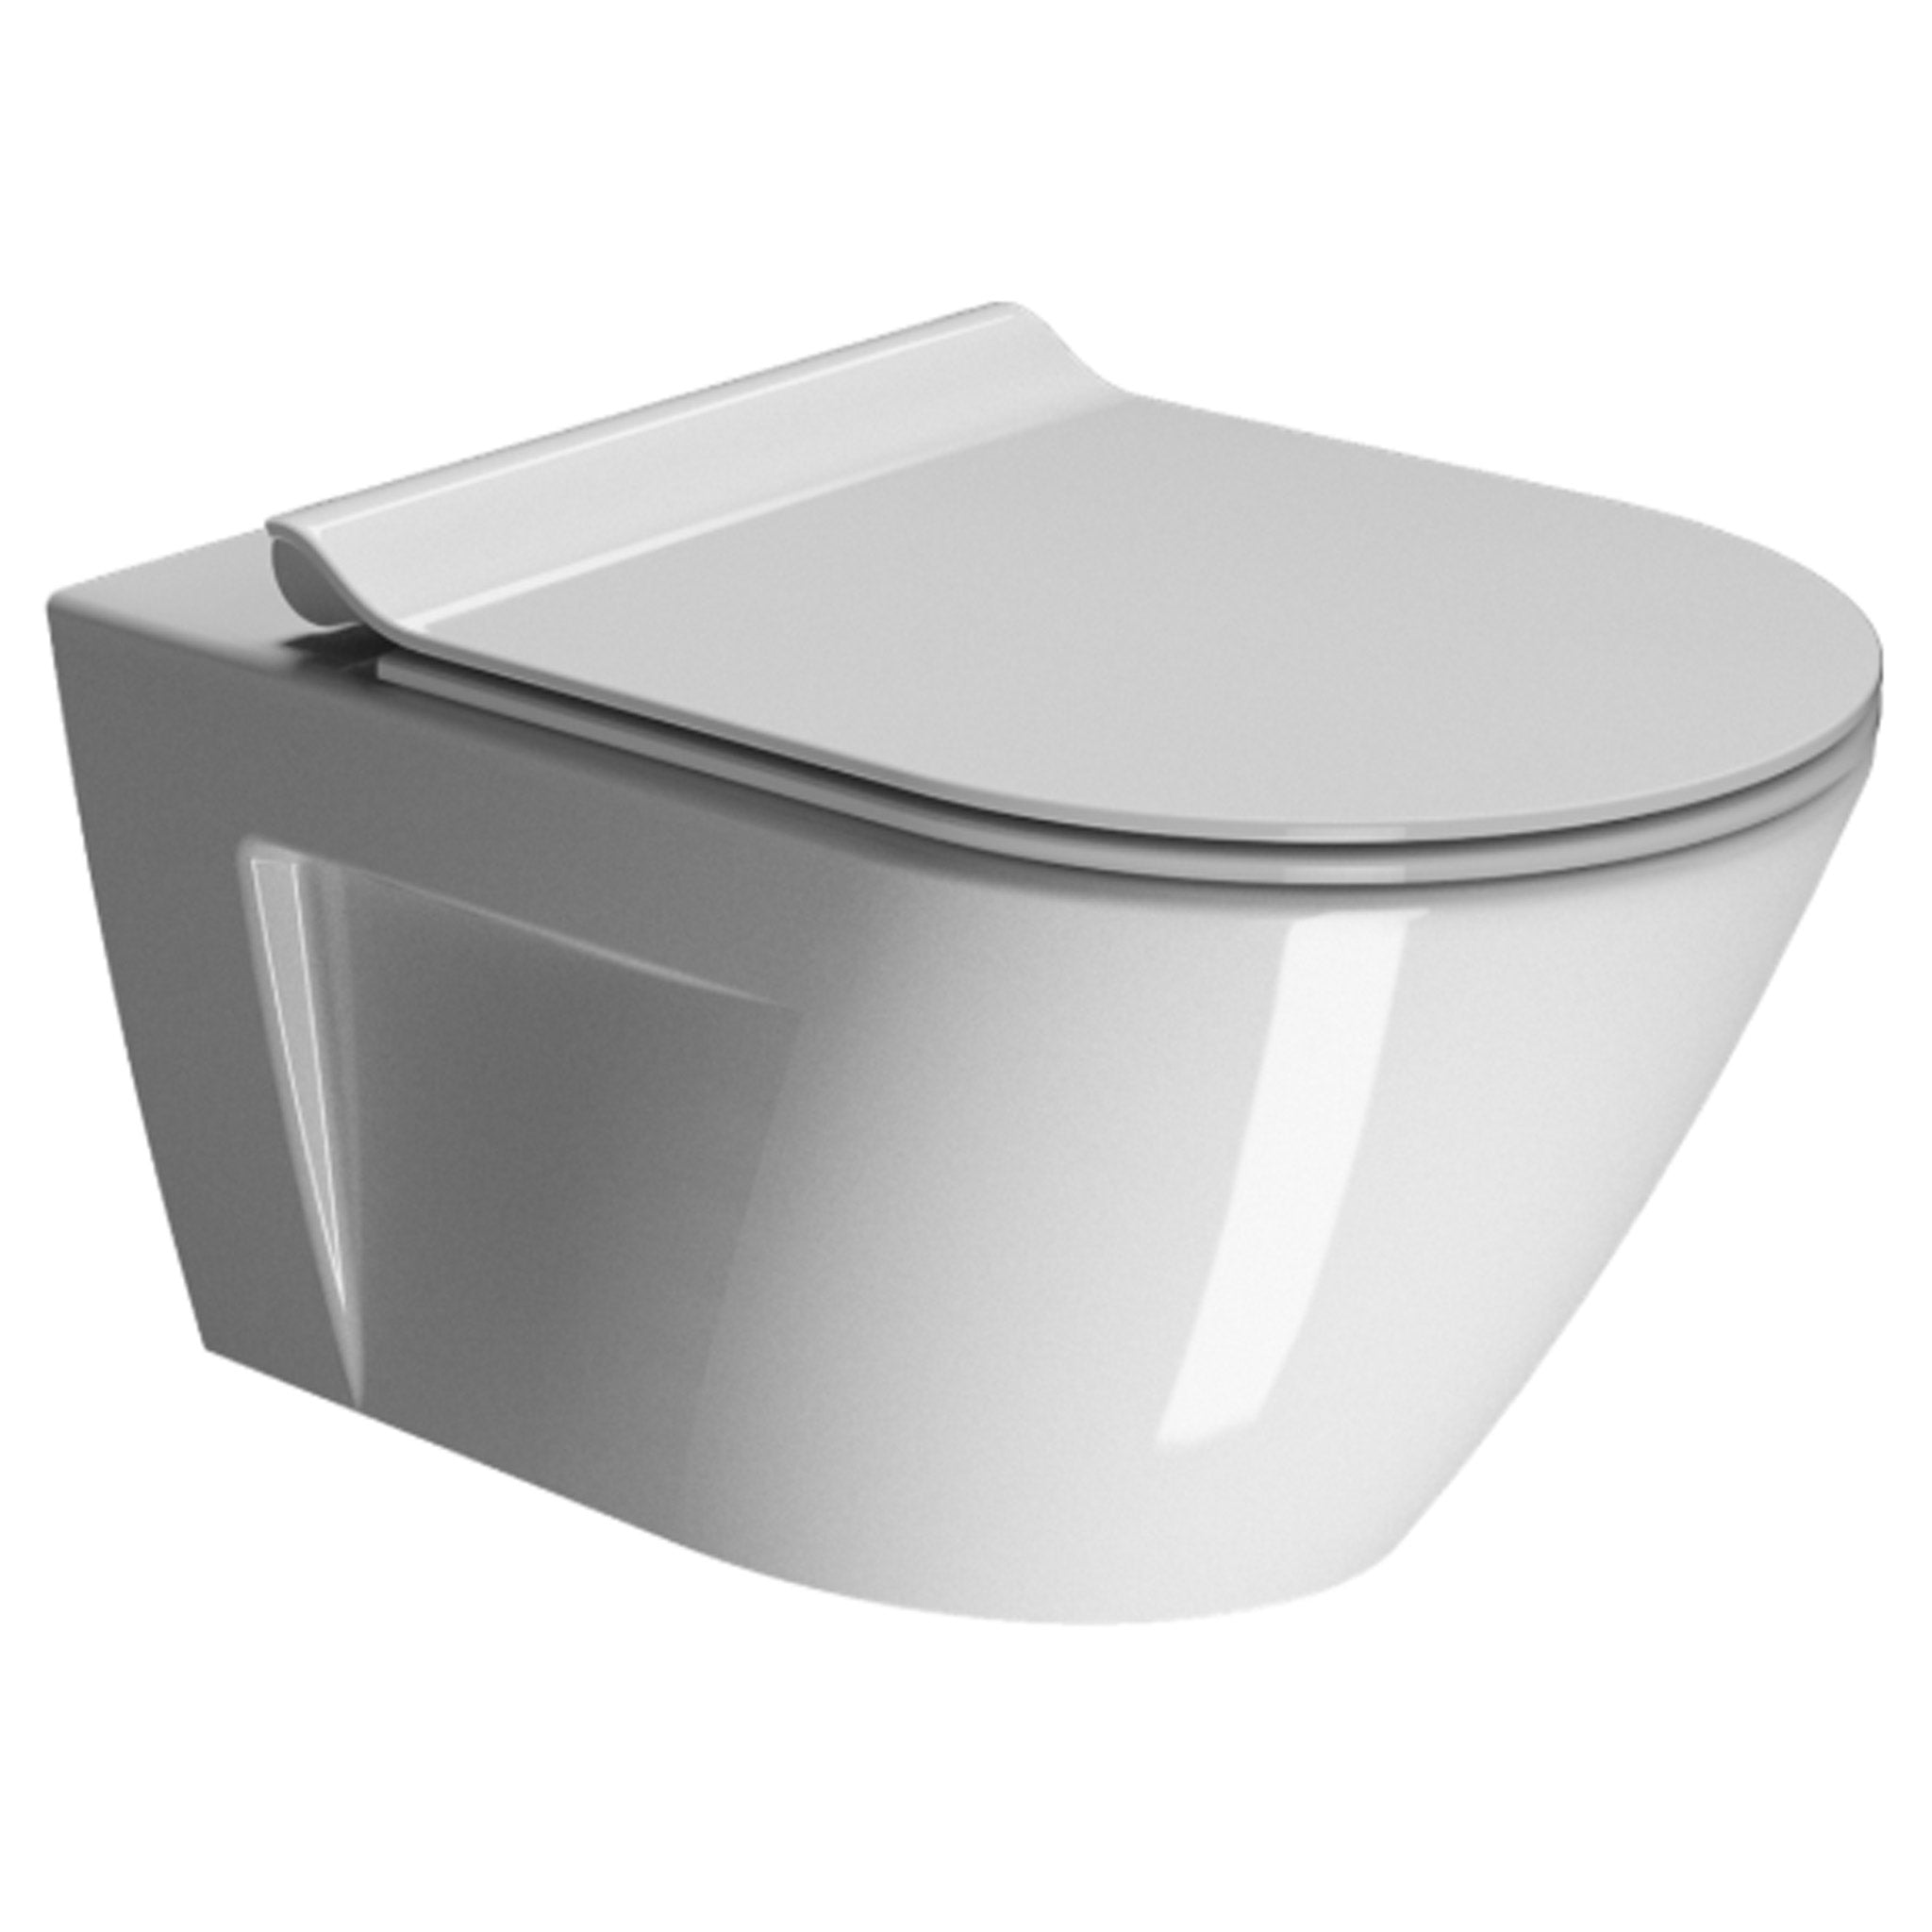 GSI Norm 55/F Wall Hung WC Pan With Swirlflush (Without Seat)